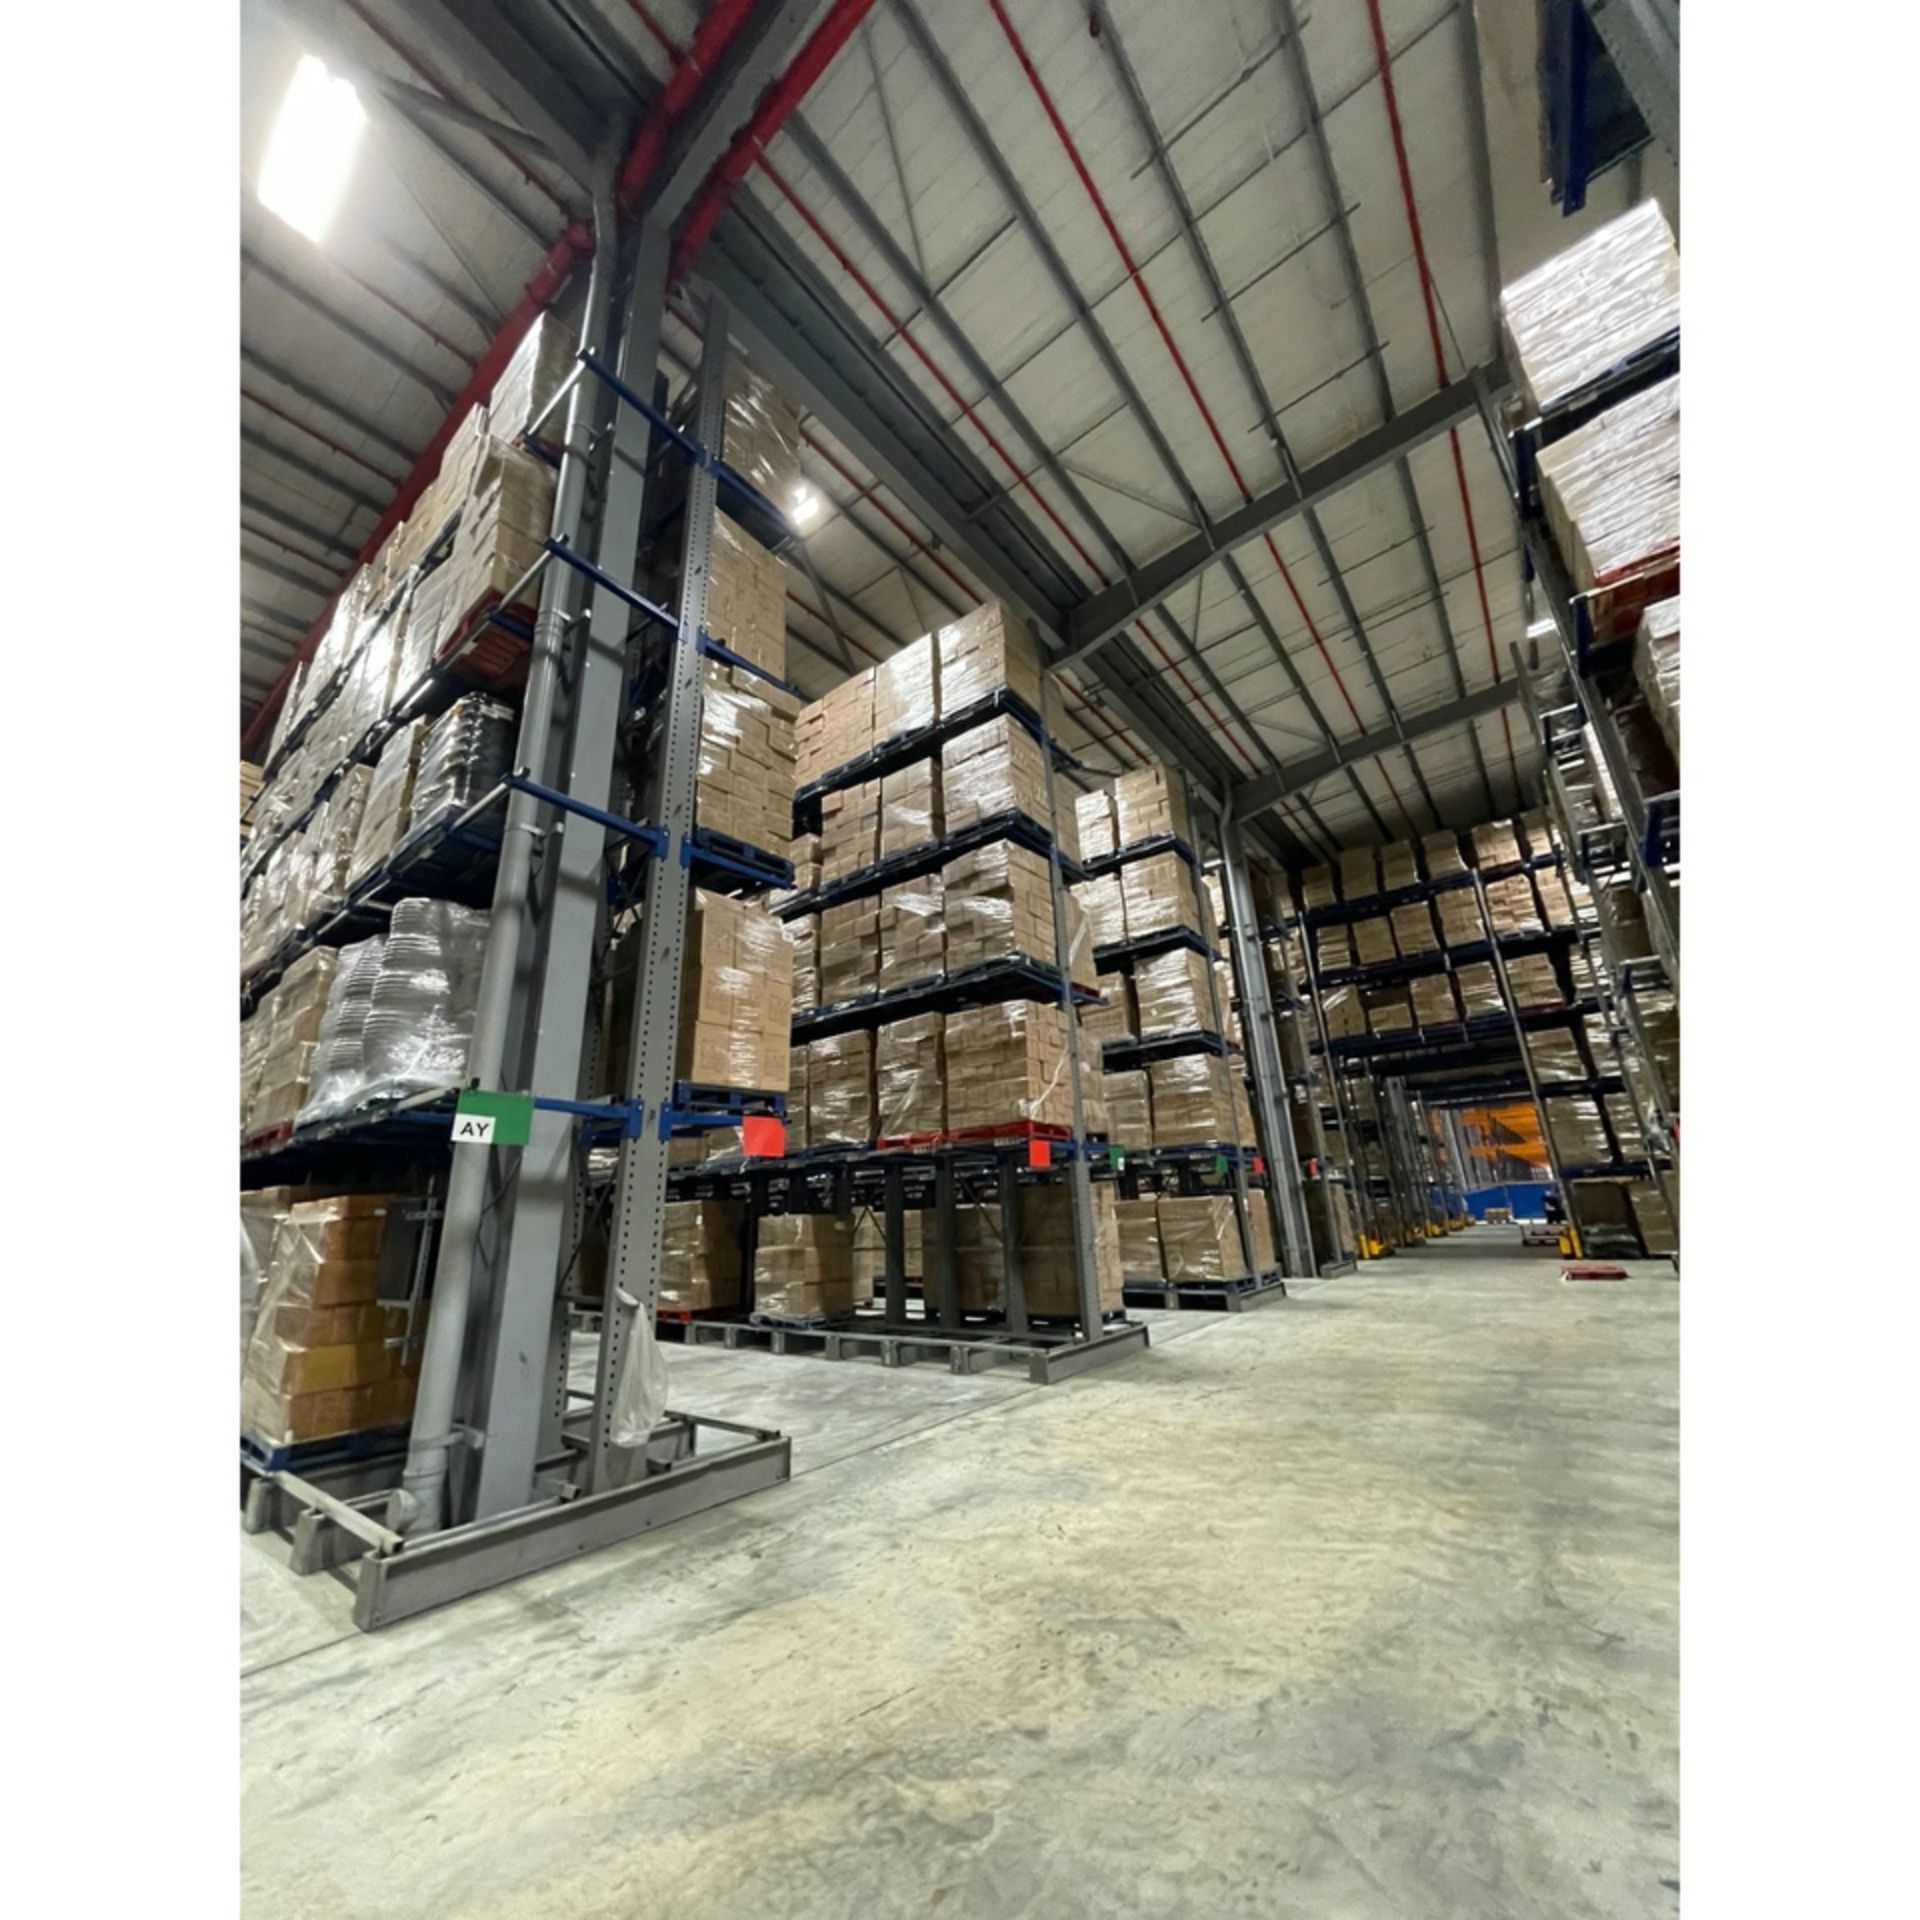 10m HIGH DOUBLE SIDED CANTILEVER RACK, including 16 Joined Bays Creating A 16m Run, 4 Arms Per - Image 2 of 3